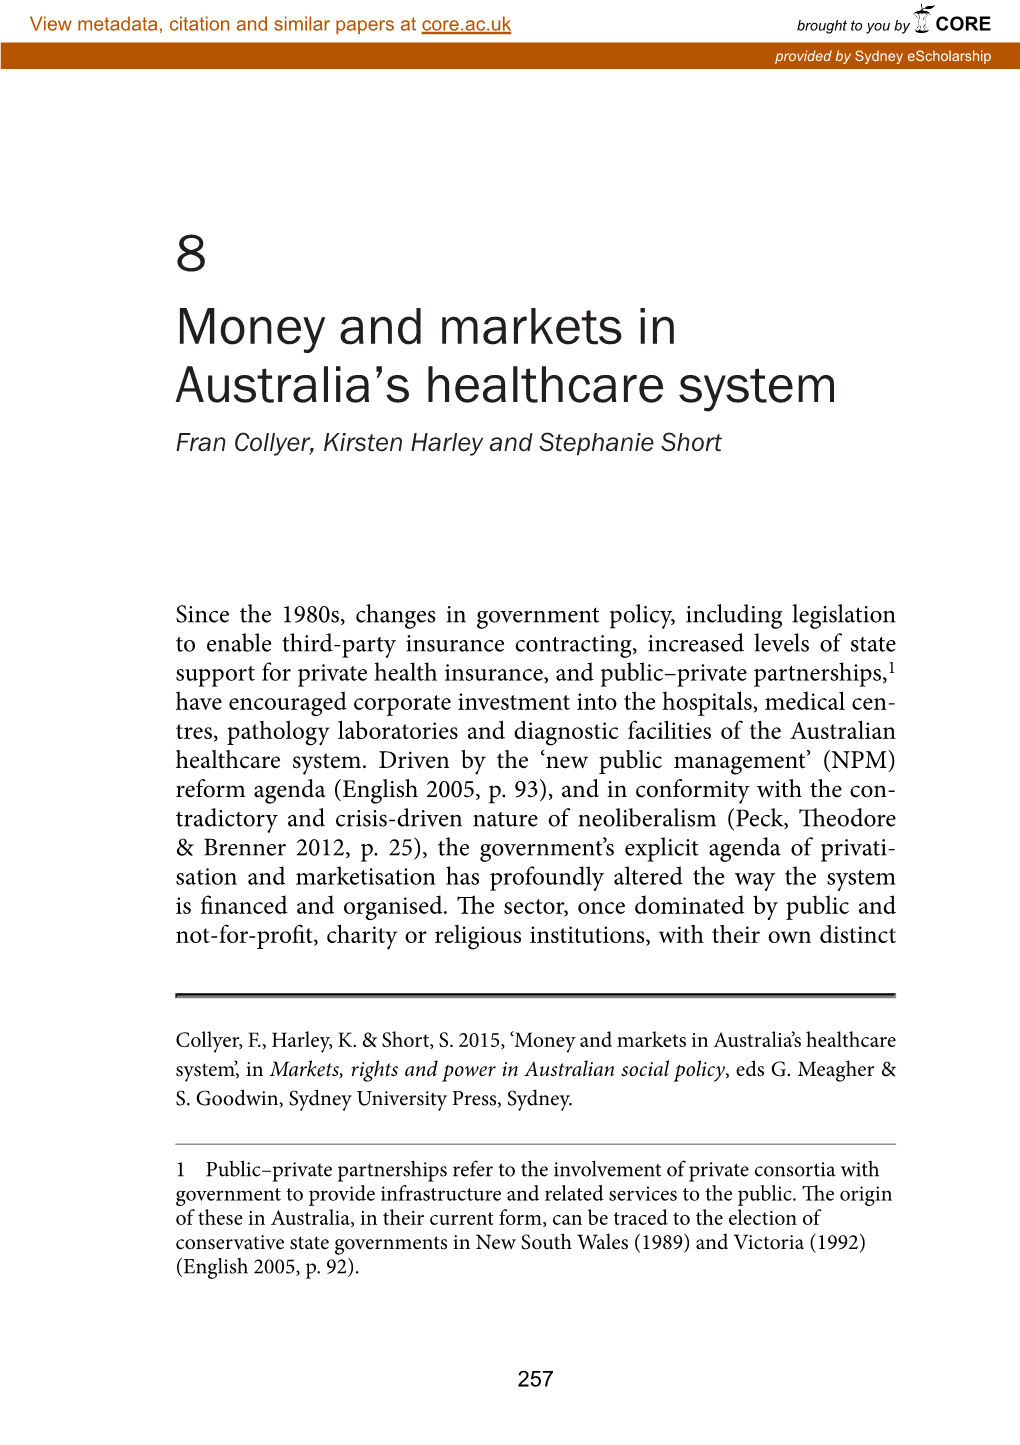 Markets, Rights and Power in Australian Social Policy, Eds G